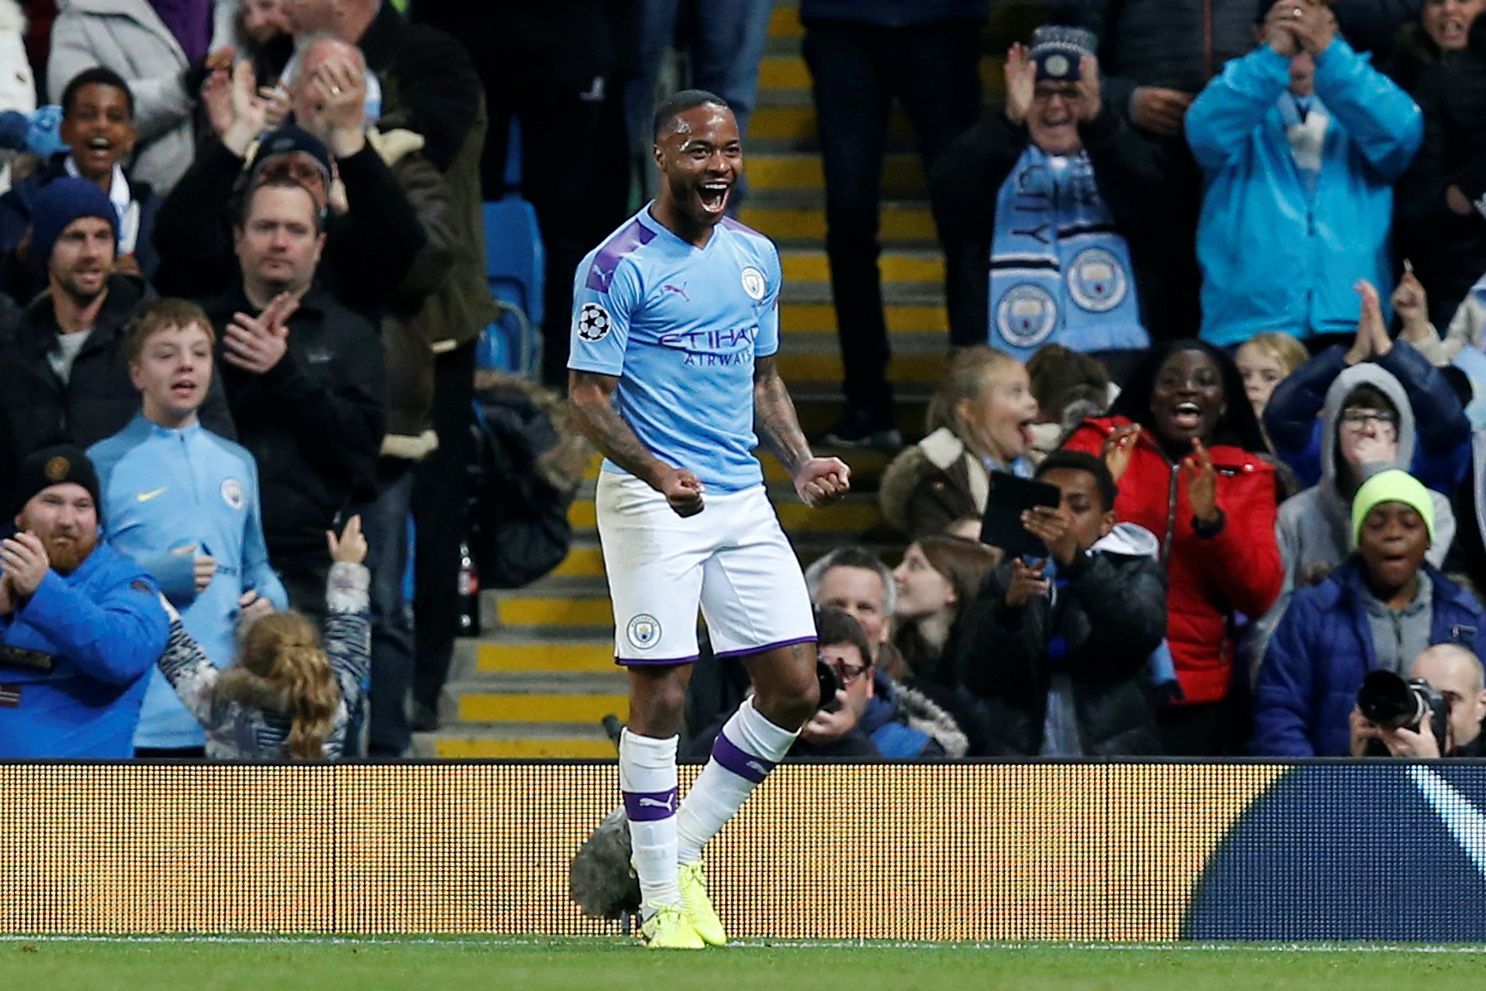 Soccer Football - Champions League - Group C - Manchester City v Atalanta - Etihad Stadium, Manchester, Britain - October 22, 2019  Manchester City's Raheem Sterling celebrates scoring their fifth goal and completing his hat-trick  REUTERS/Andrew Yates